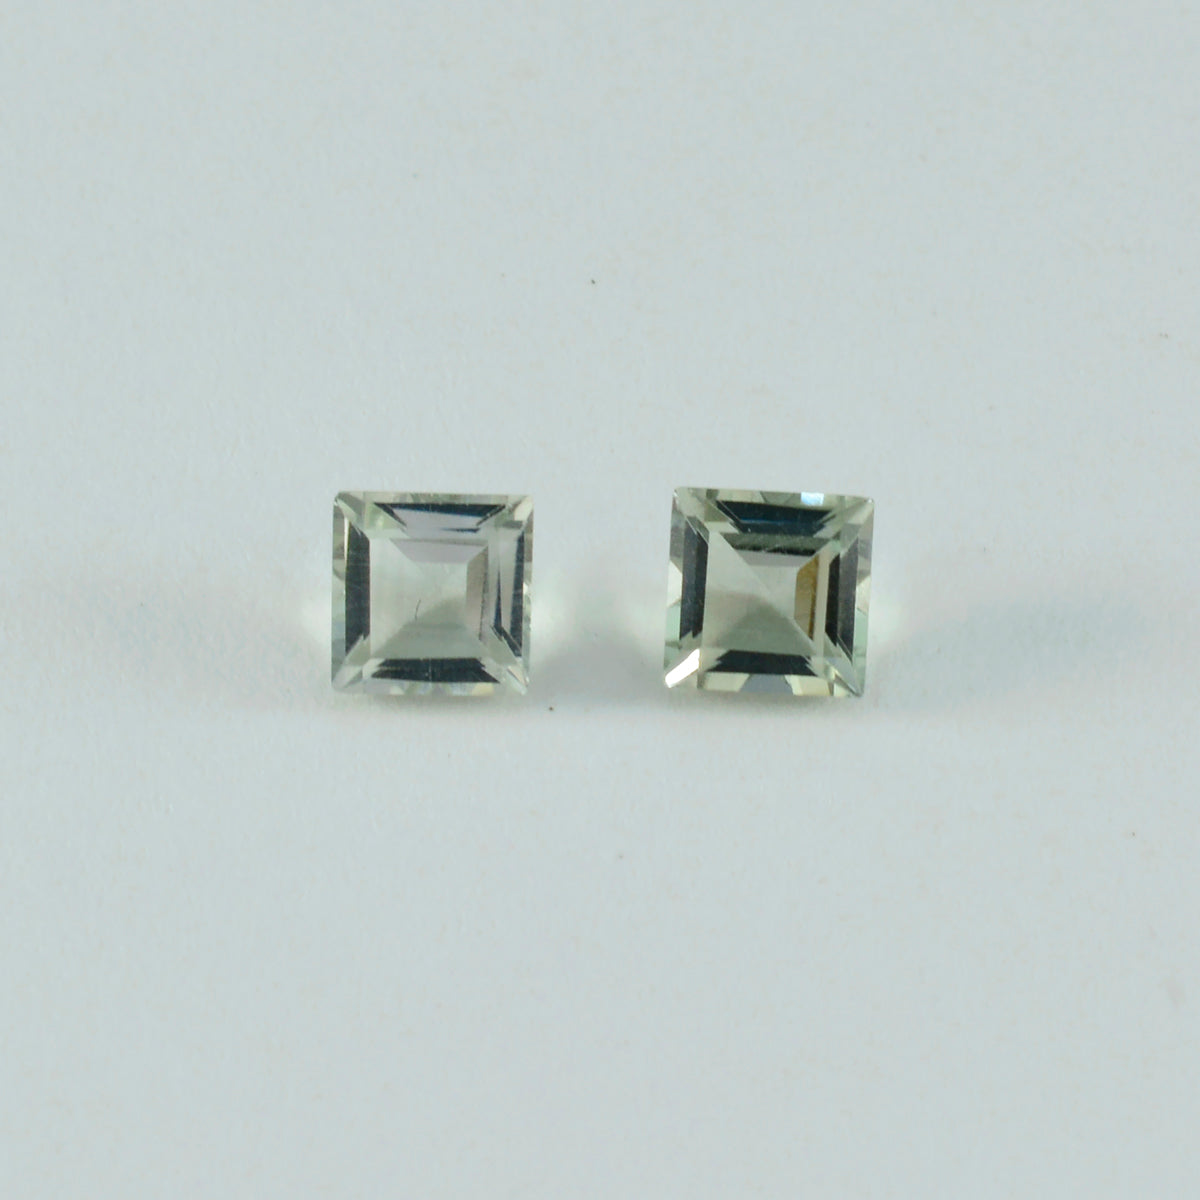 Riyogems 1PC Green Amethyst Faceted 10x10 mm Square Shape A Quality Loose Stone